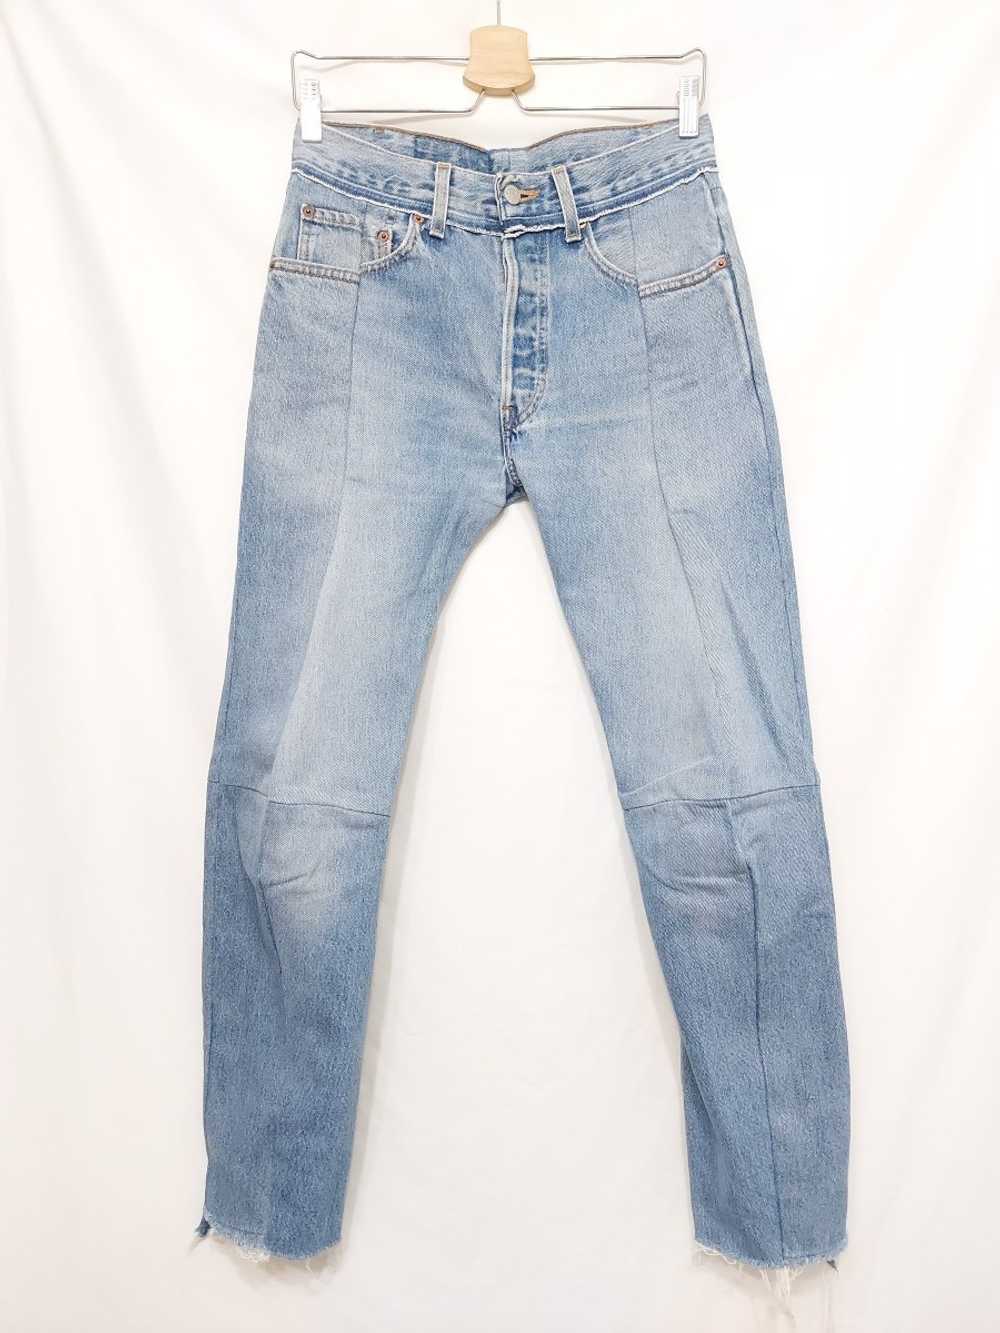 Levi's FW17 AW17 Reworked Jeans - image 1